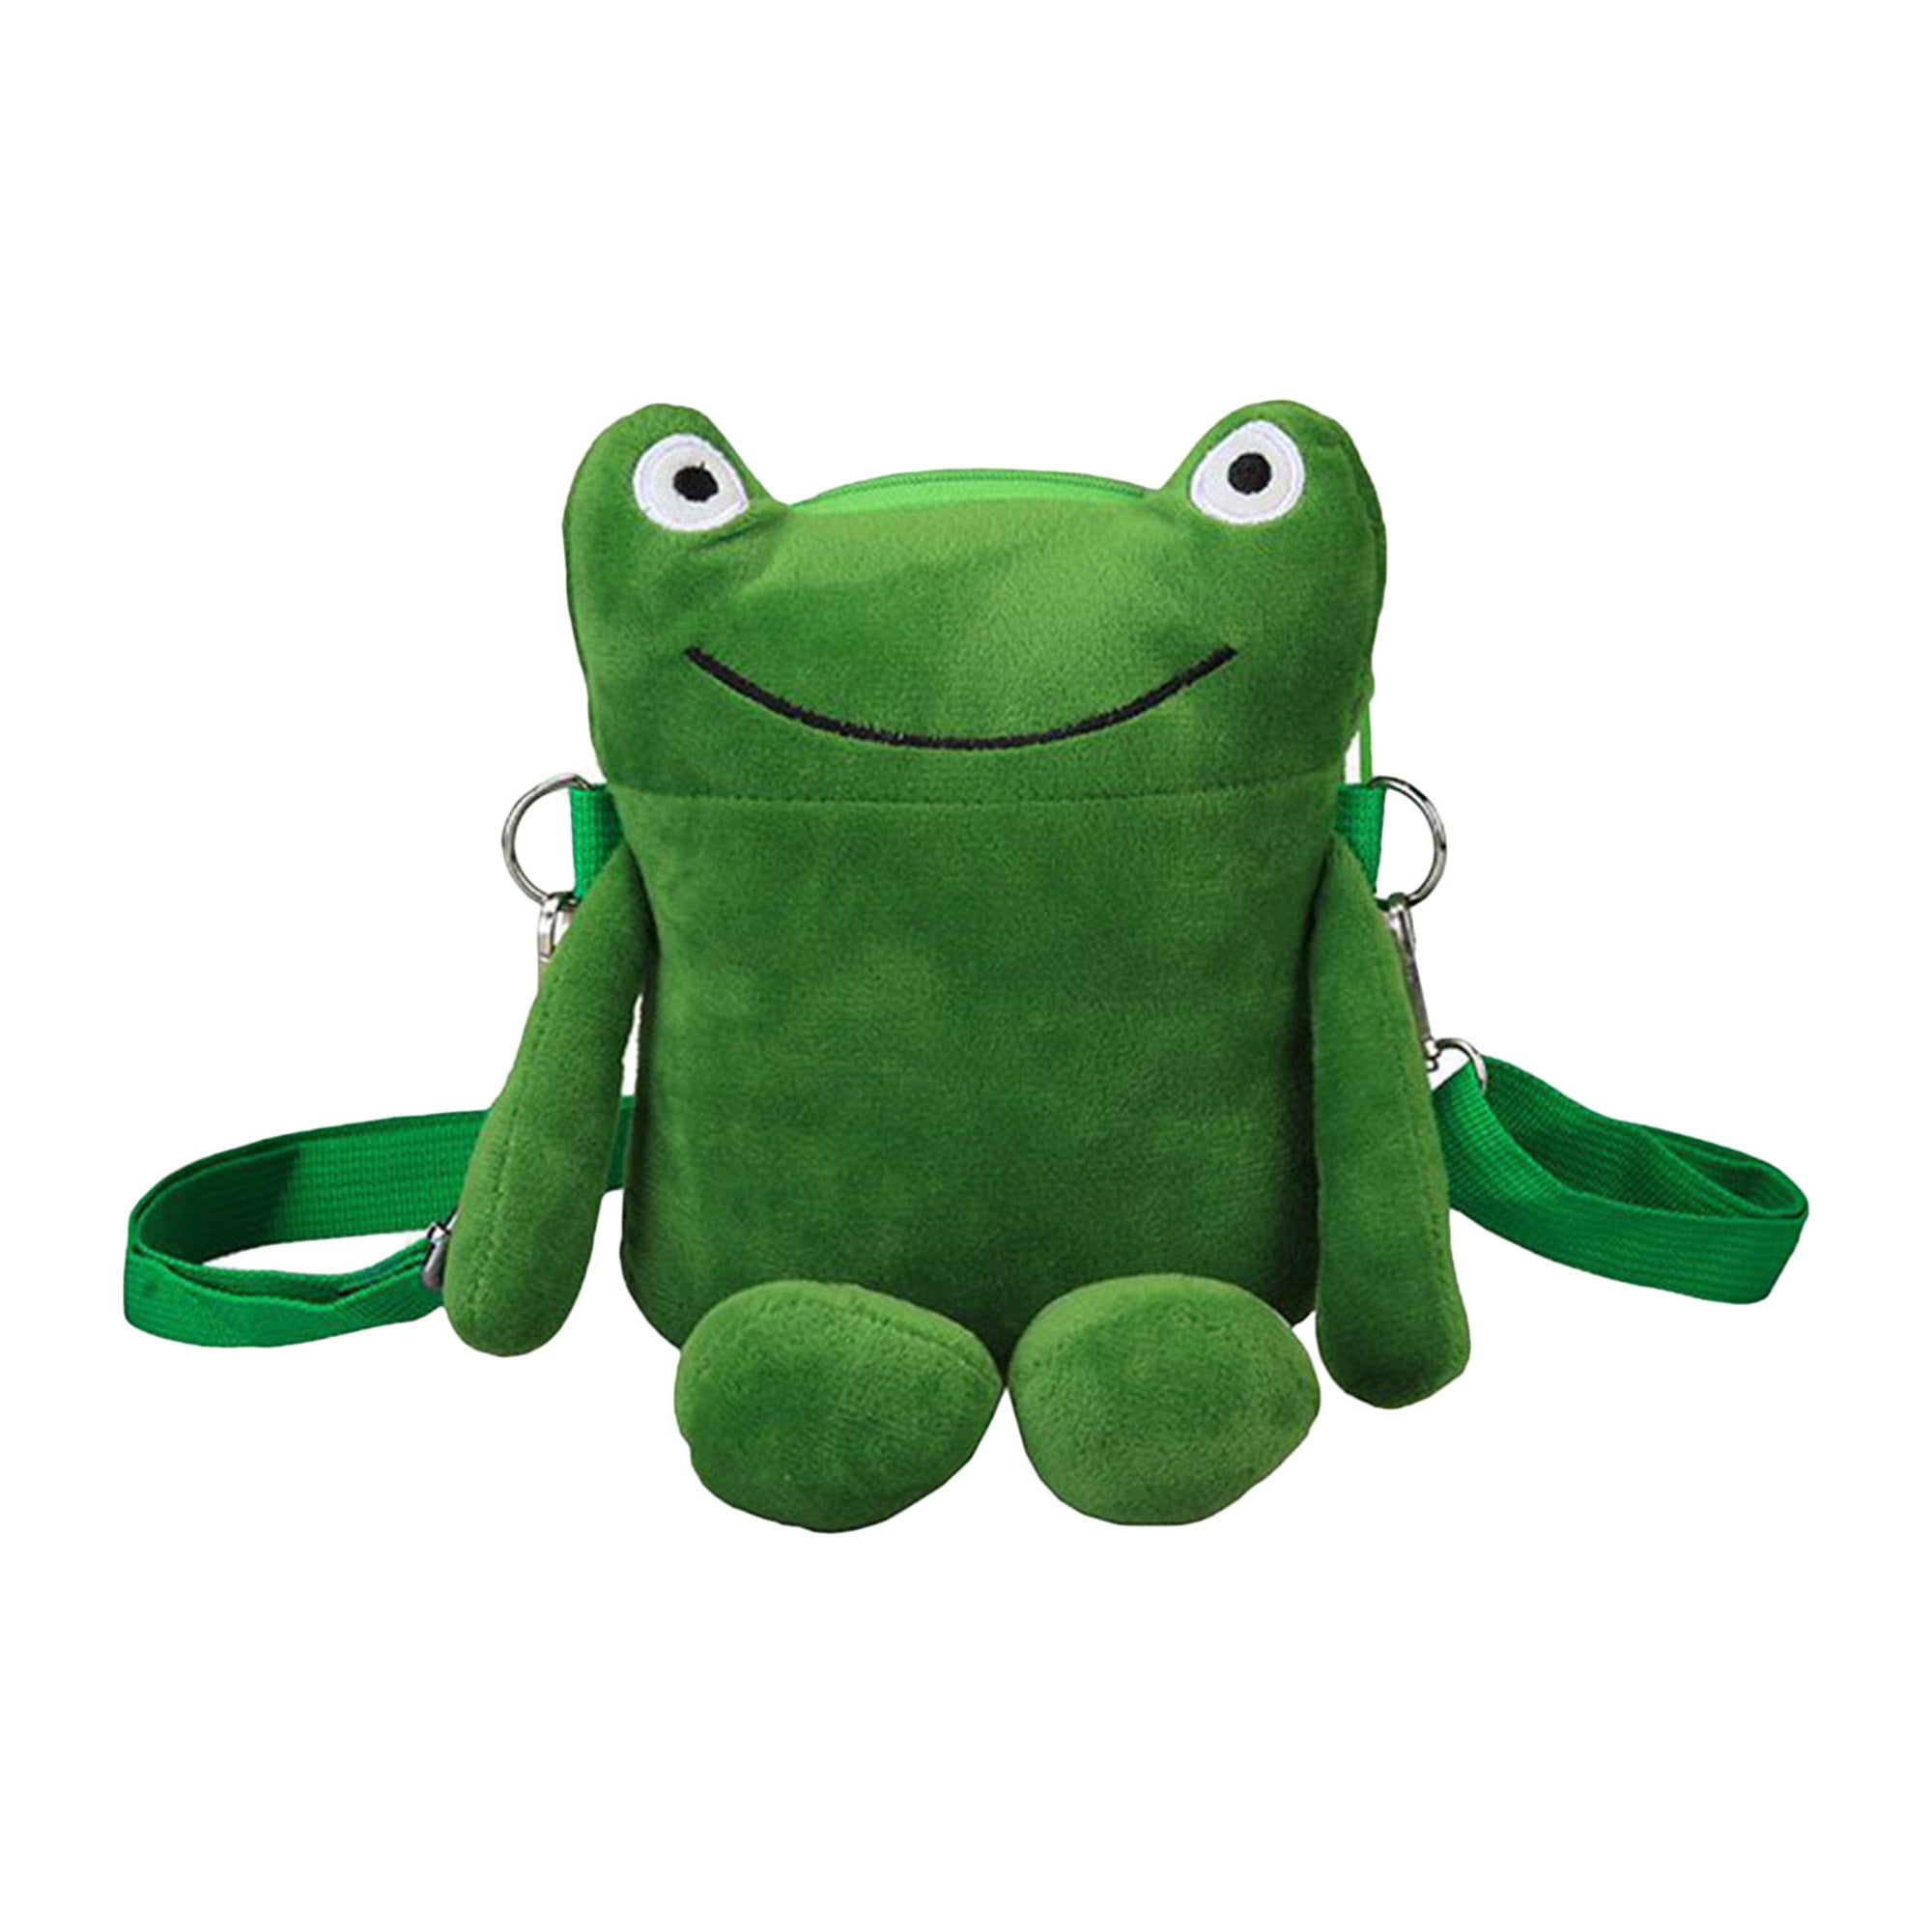 Cute Frog Square Pencil Case Green Animal Print Vintage Leather